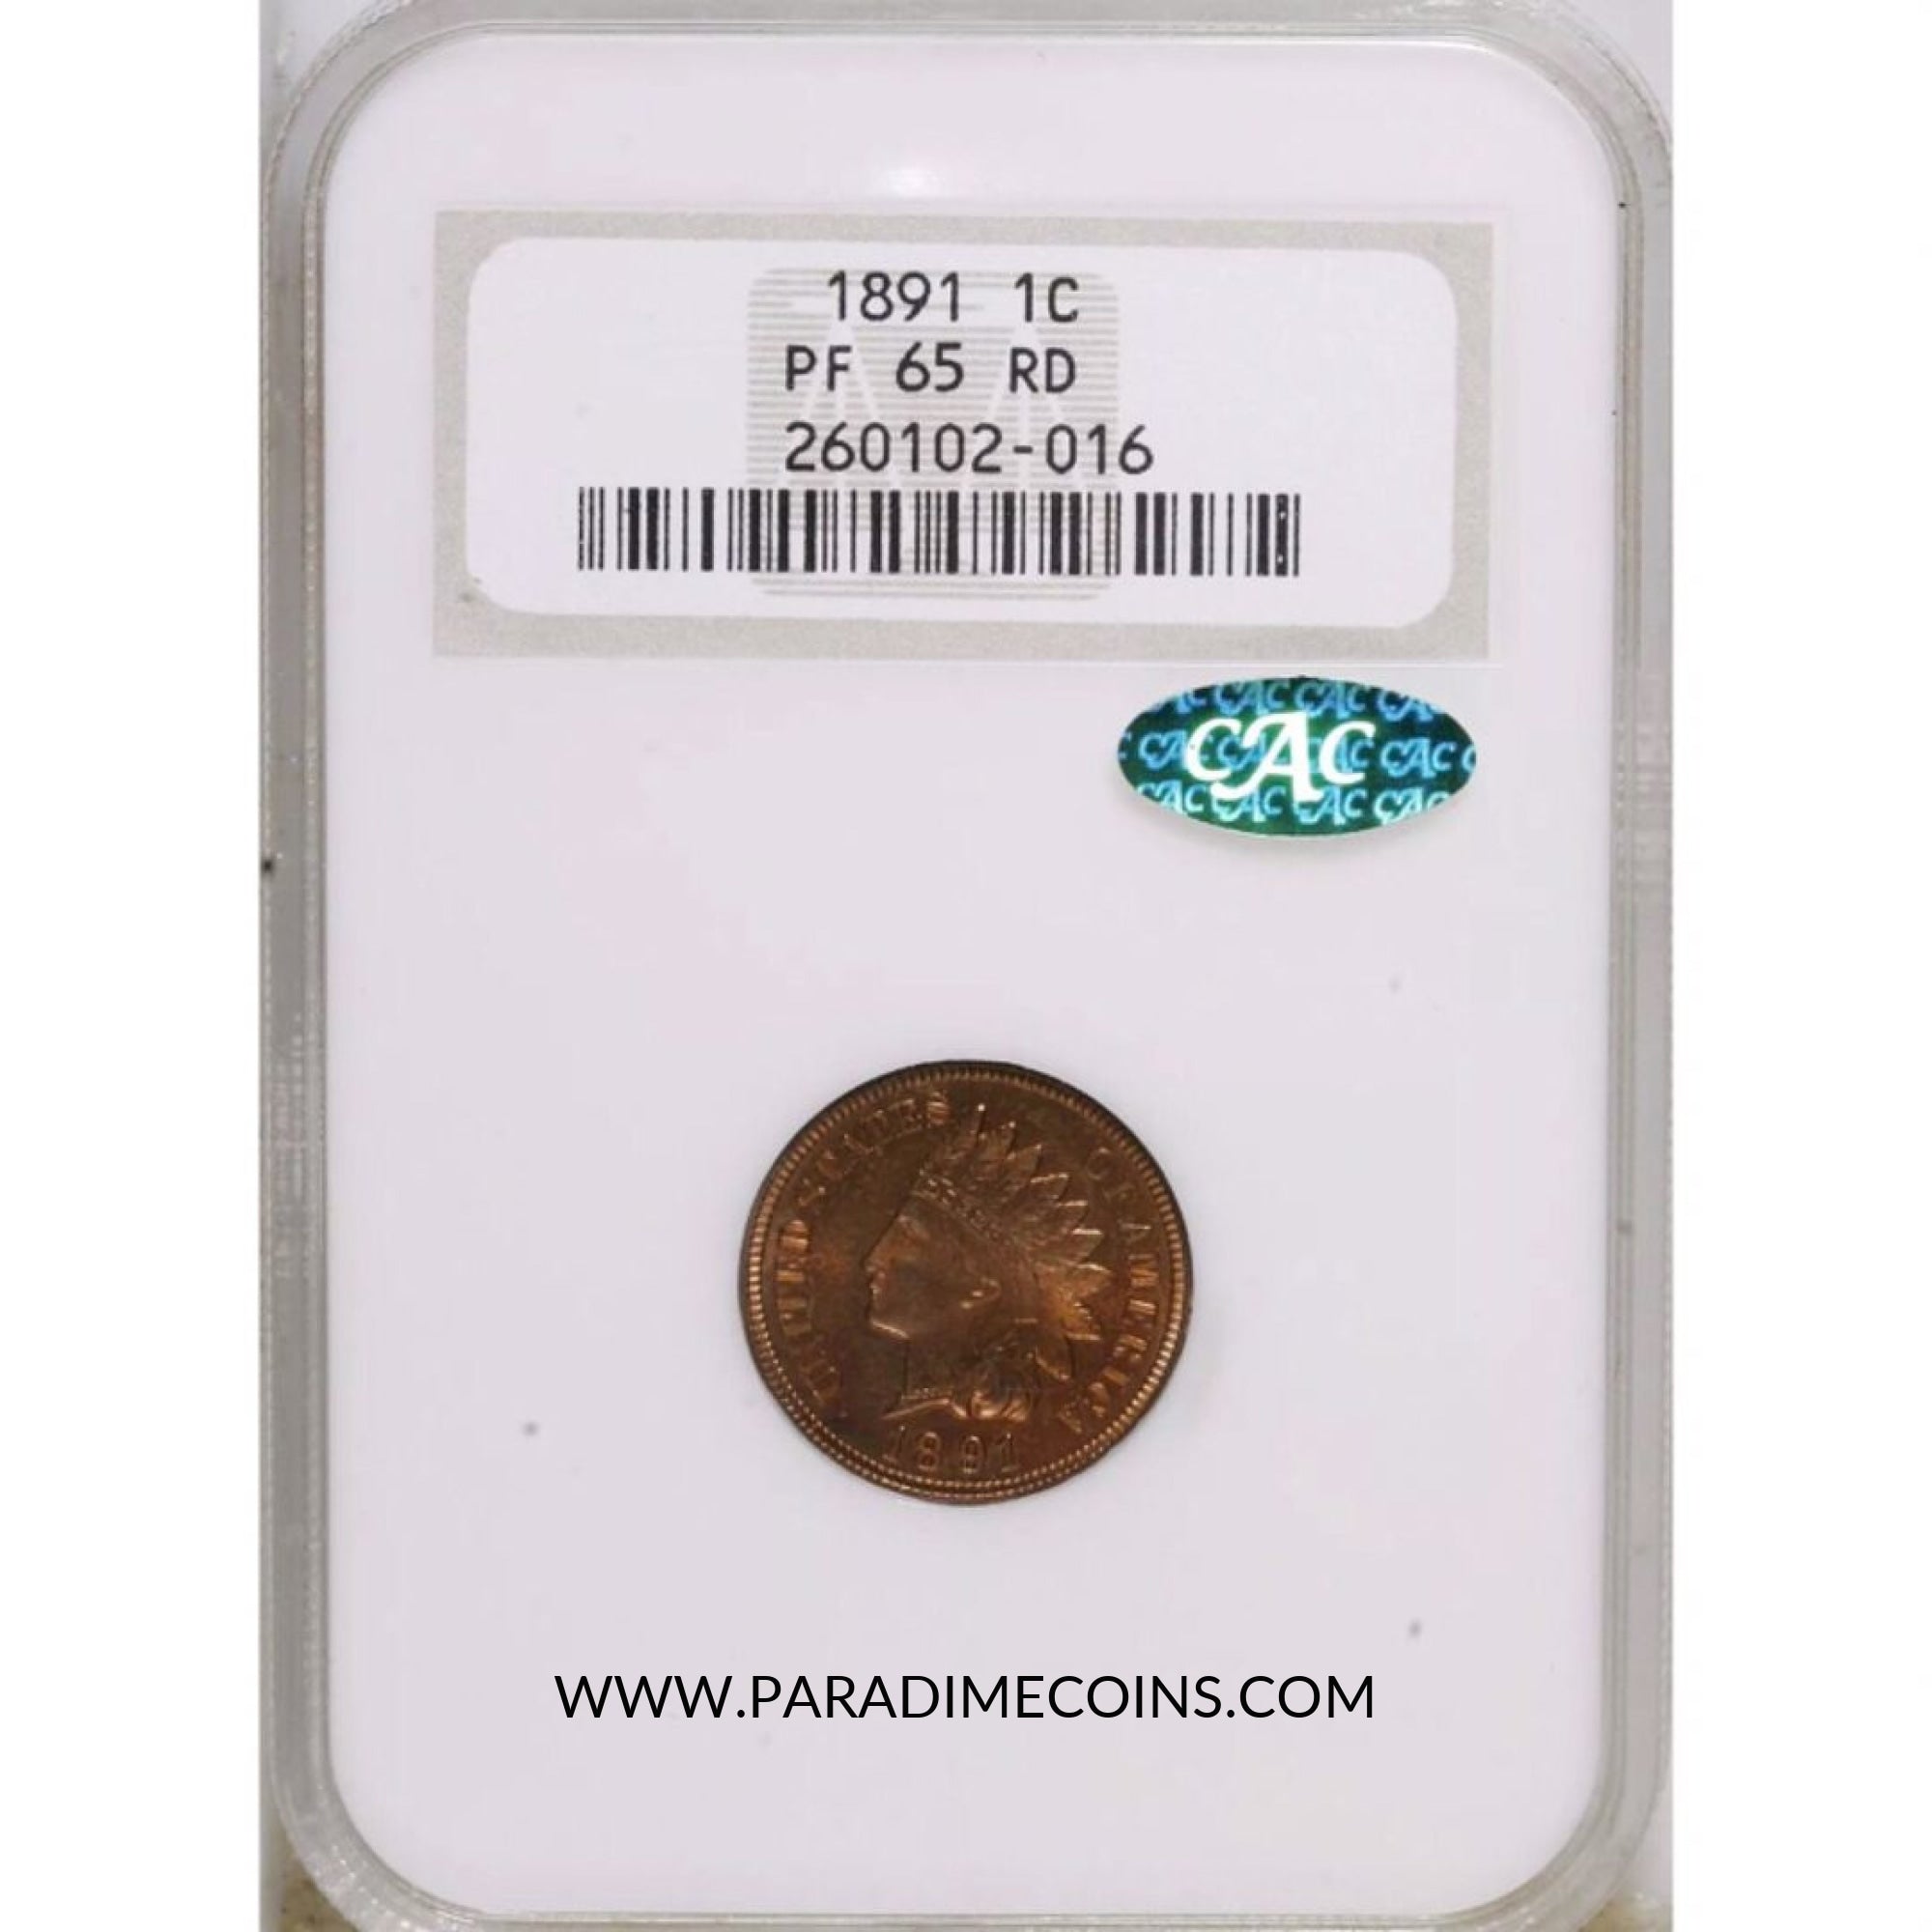 1891 1C PR65RD CAC NGC - Paradime Coins | PCGS NGC CACG CAC Rare US Numismatic Coins For Sale